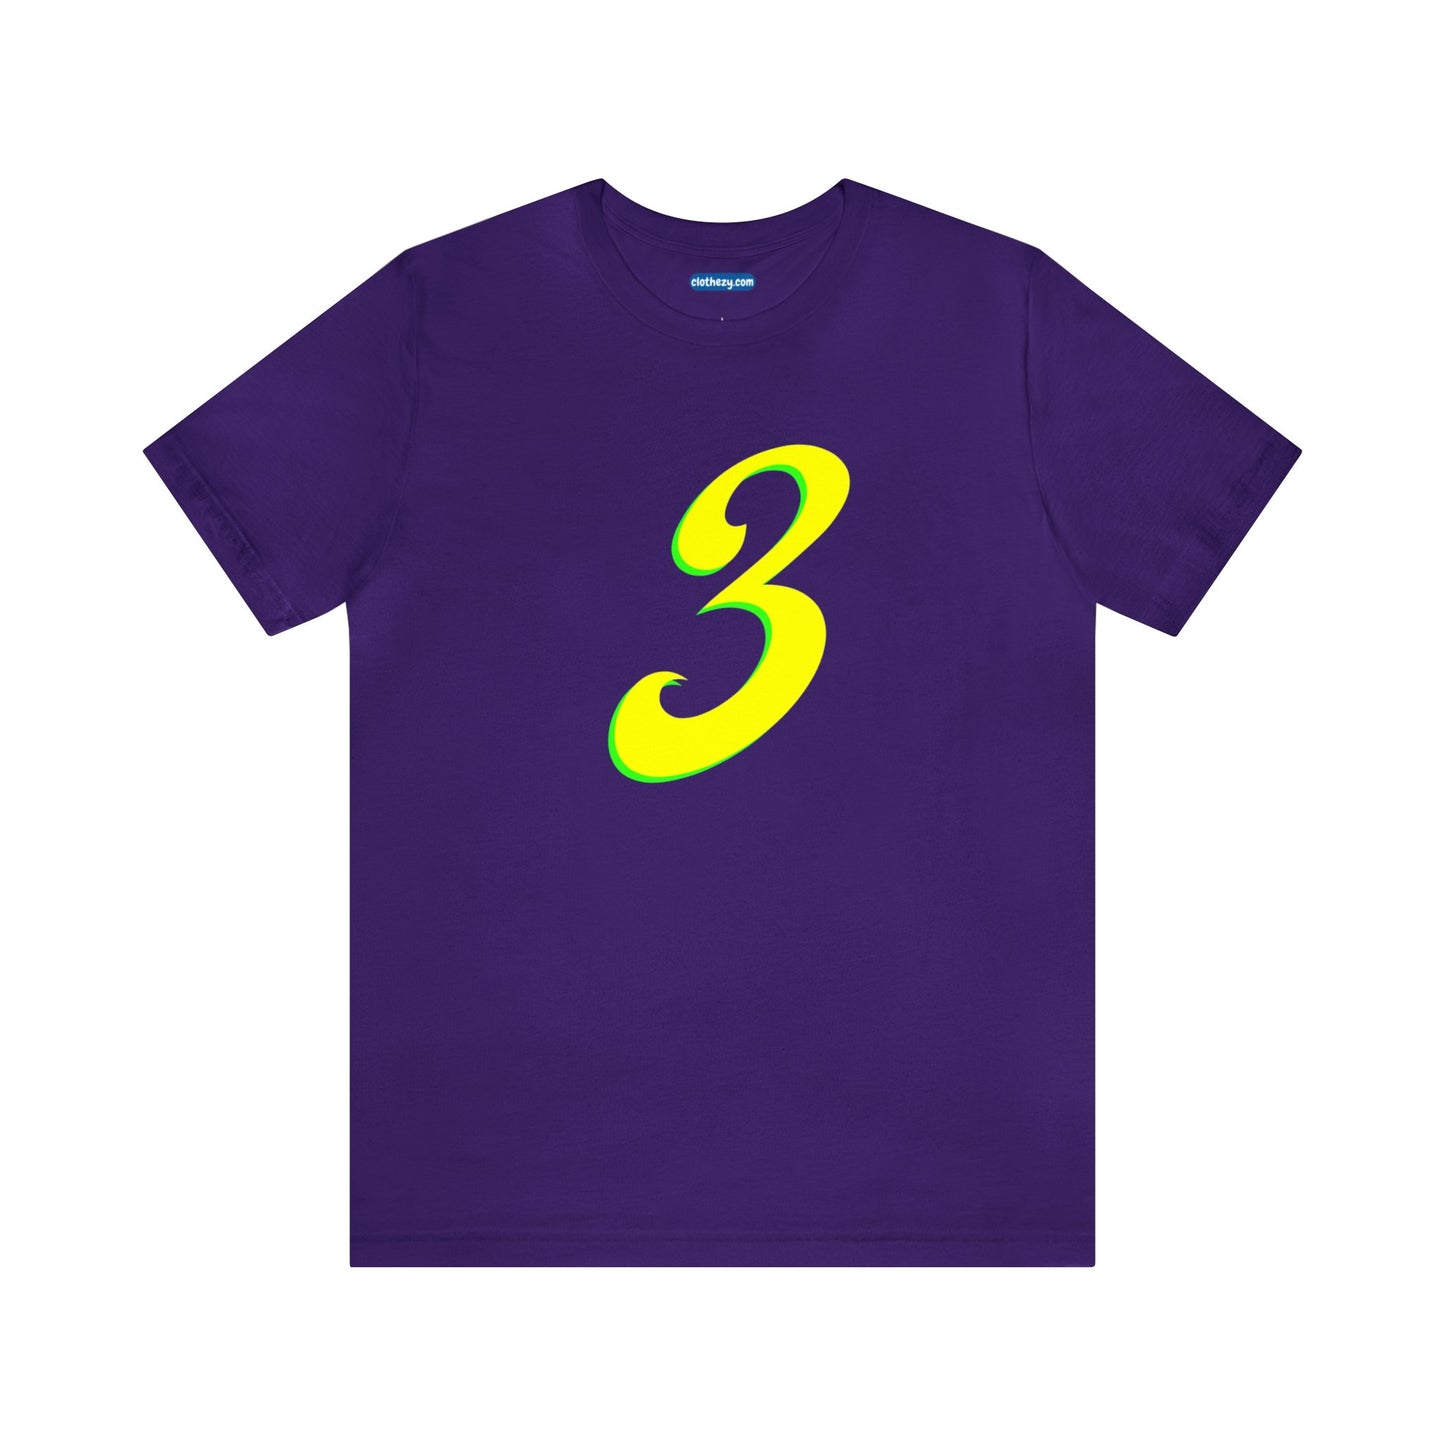 Number 3 Design - Soft Cotton Tee for birthdays and celebrations, Gift for friends and family, Multiple Options by clothezy.com in Purple Size Small - Buy Now